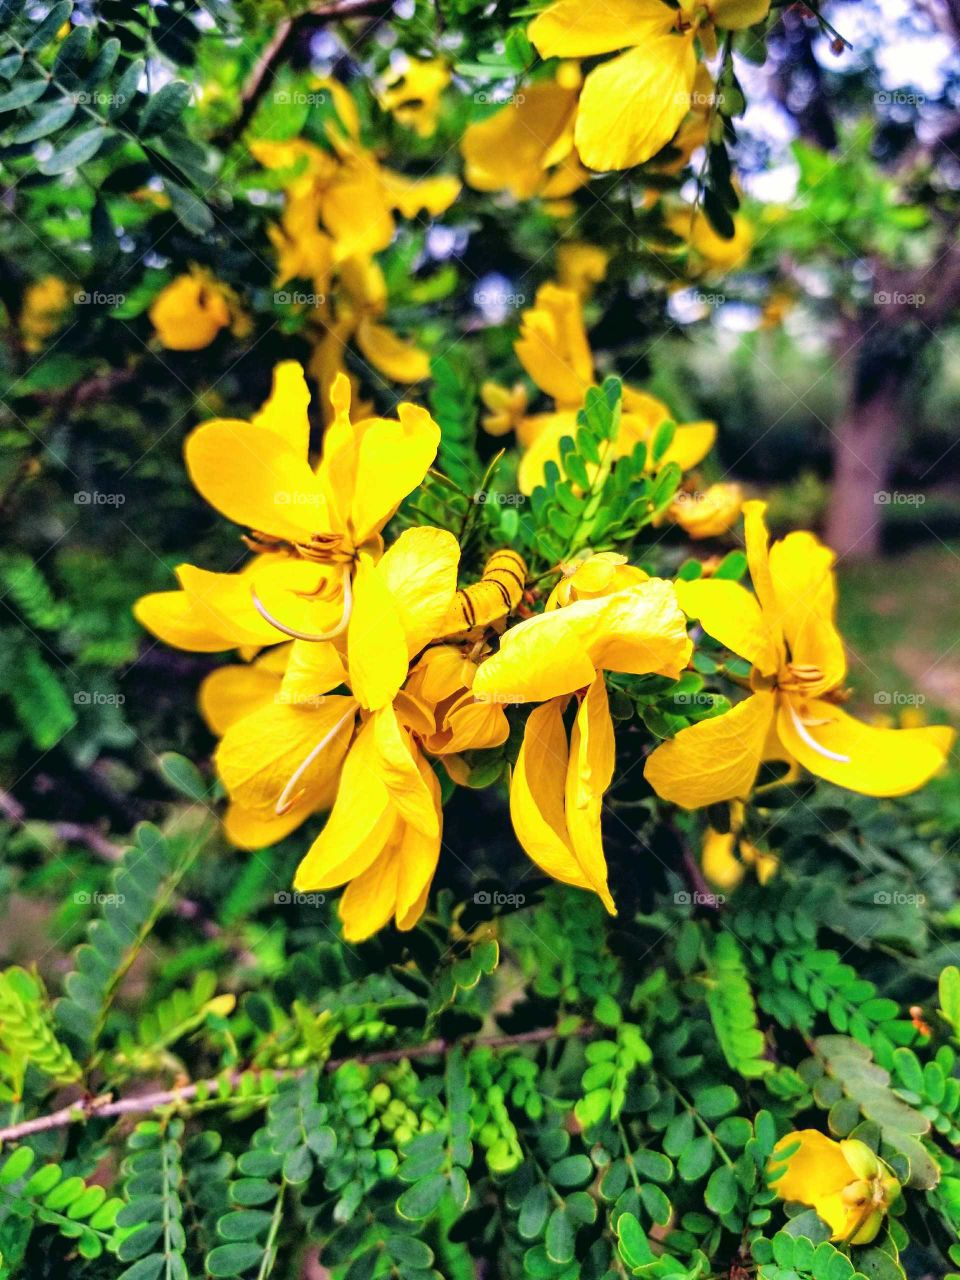 Yellow flowers with caterpillar in them.